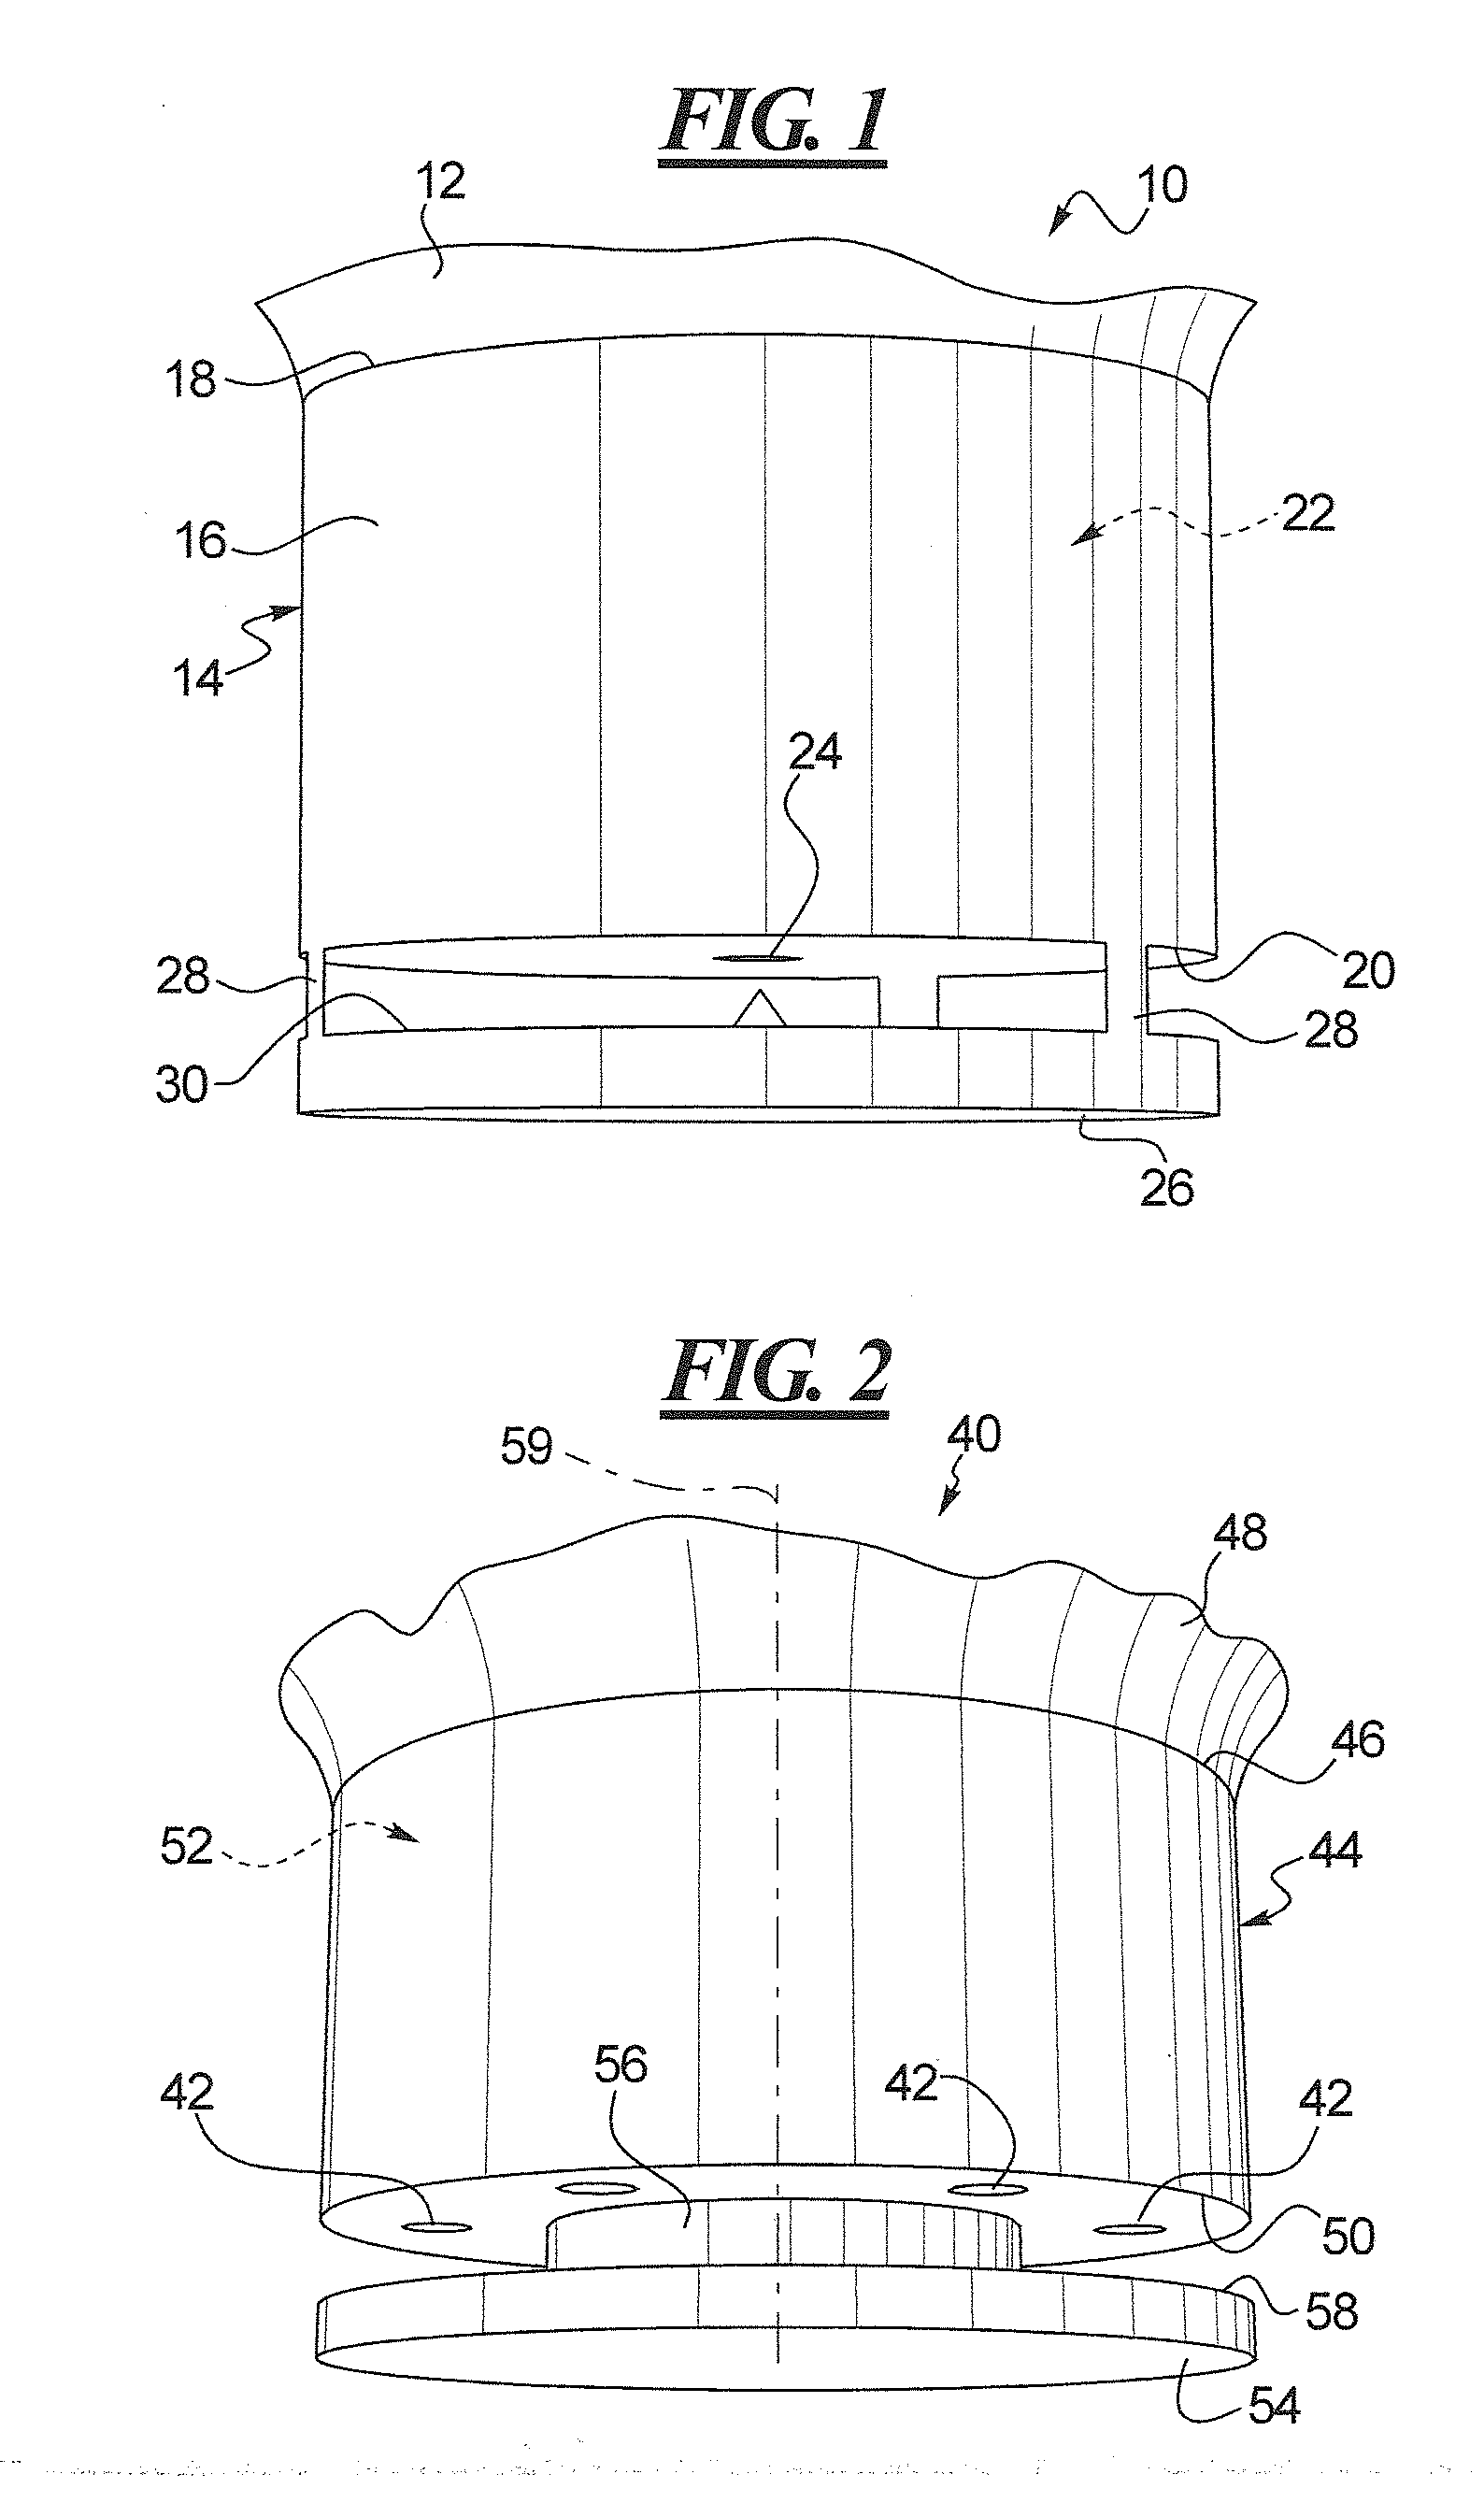 Fluid Dispensing Device for Discharging Fluid Simultaneously in Multiple Directions